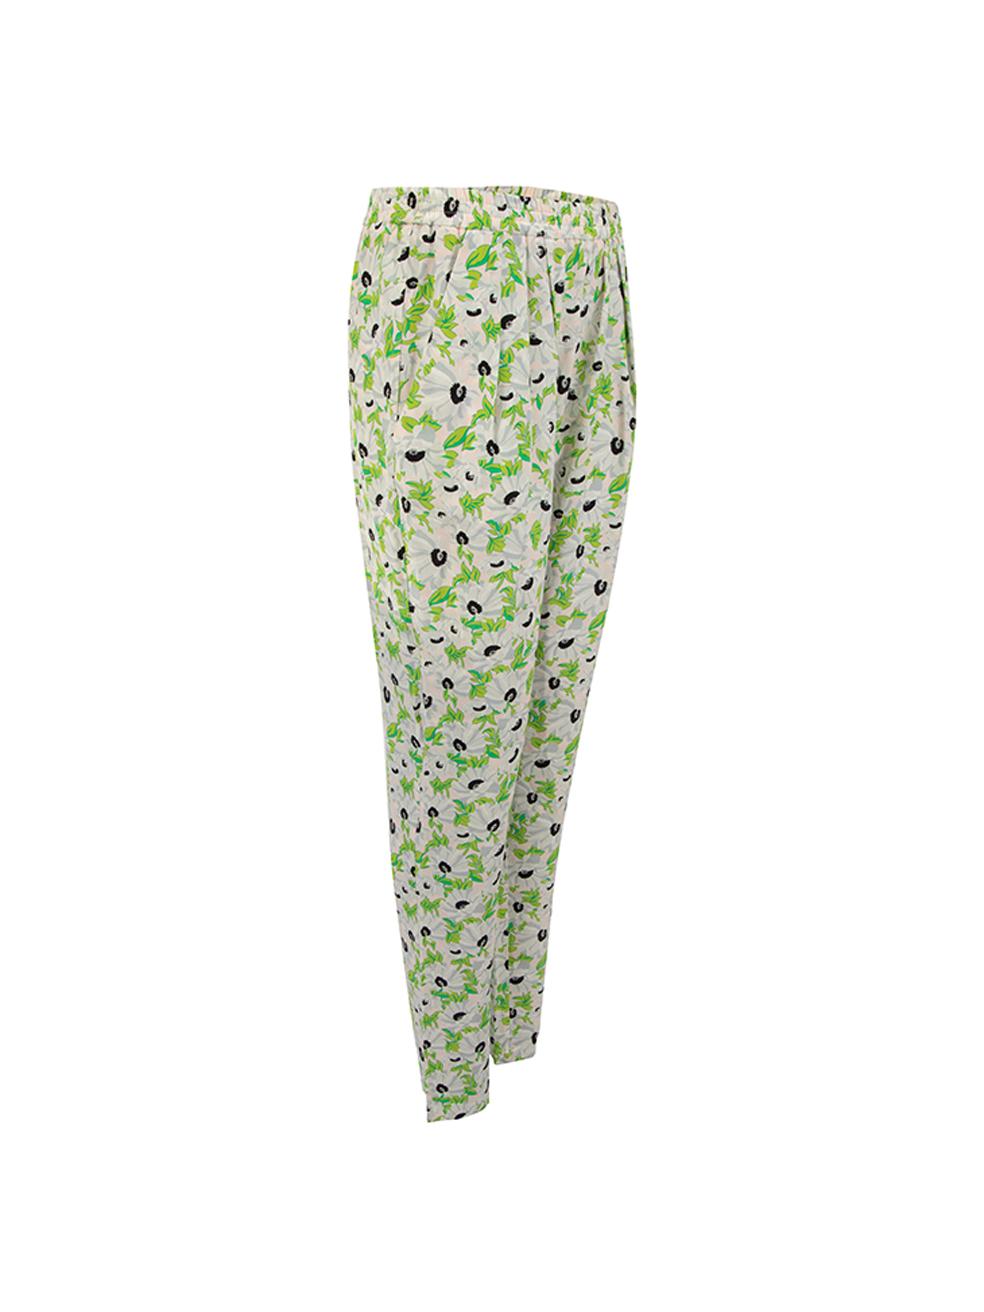 CONDITION is Never Worn. No visible wear to trousers is evident on this used Stella McCartney designer resale item. Details 2015 Multicolour Silk Straight leg trousers Floral pattern High rise Elasticated waistband Front side pockets Made in Hungary